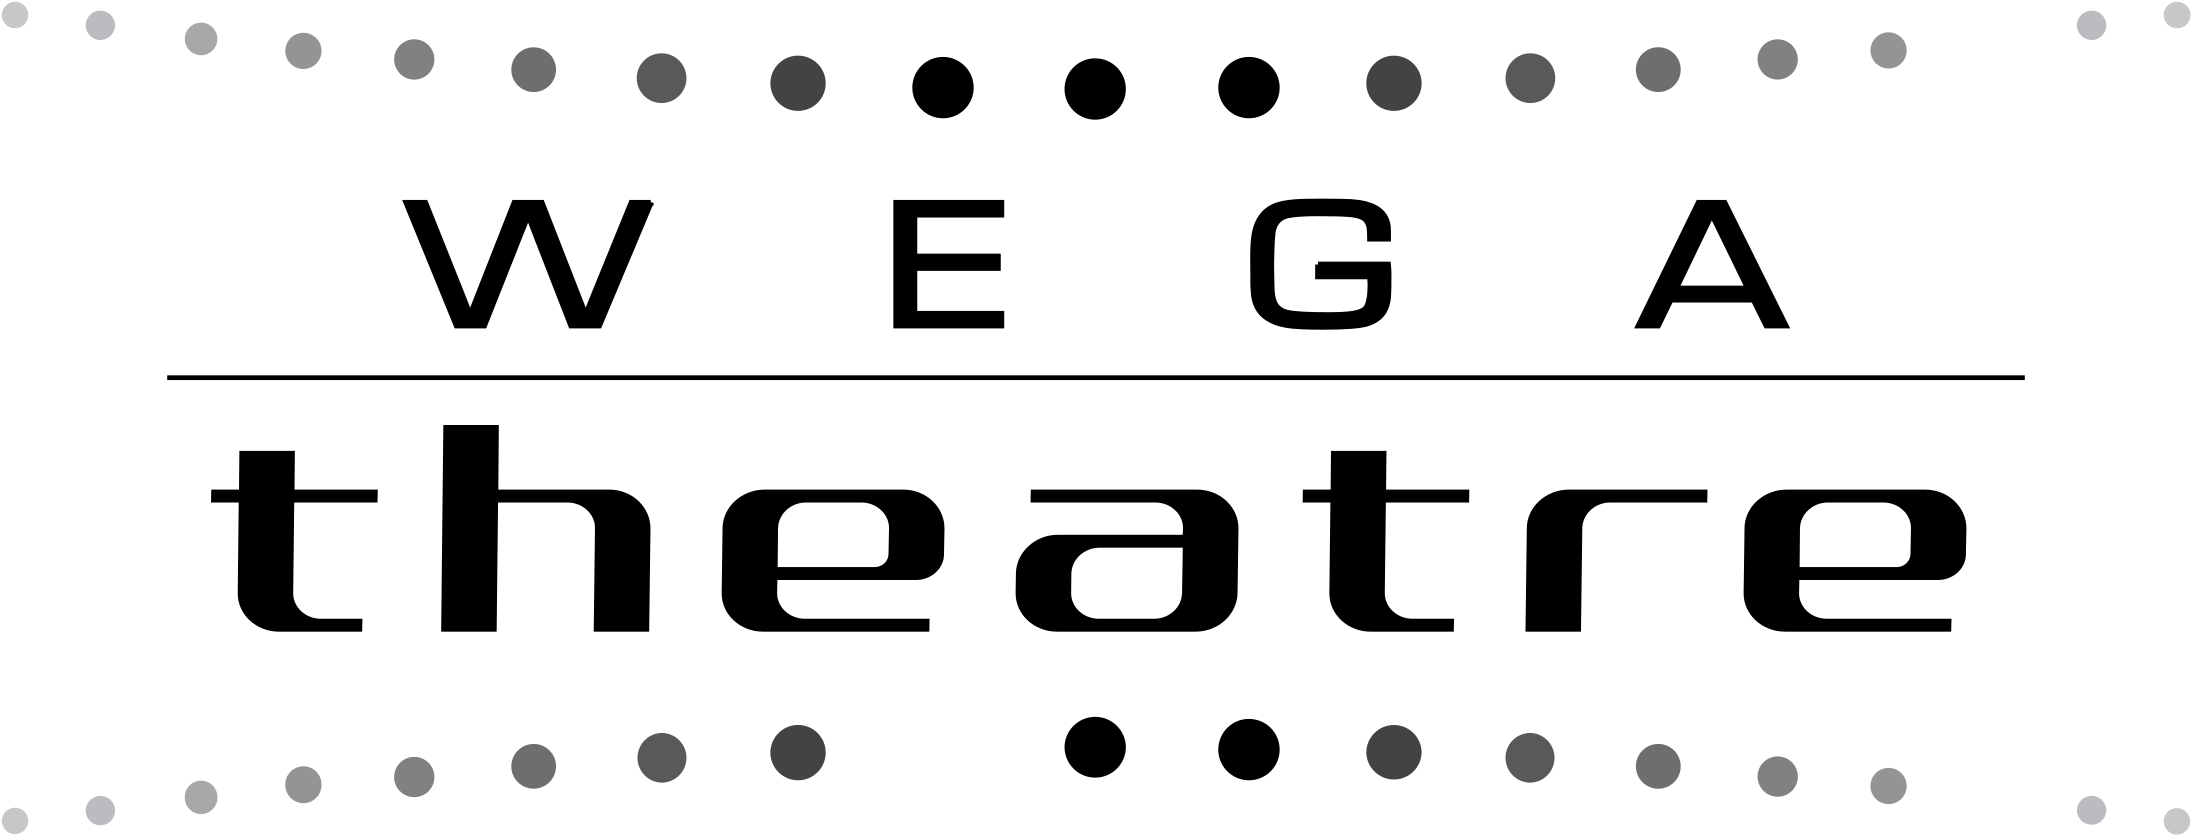 A Black Rectangle With Grey Dots